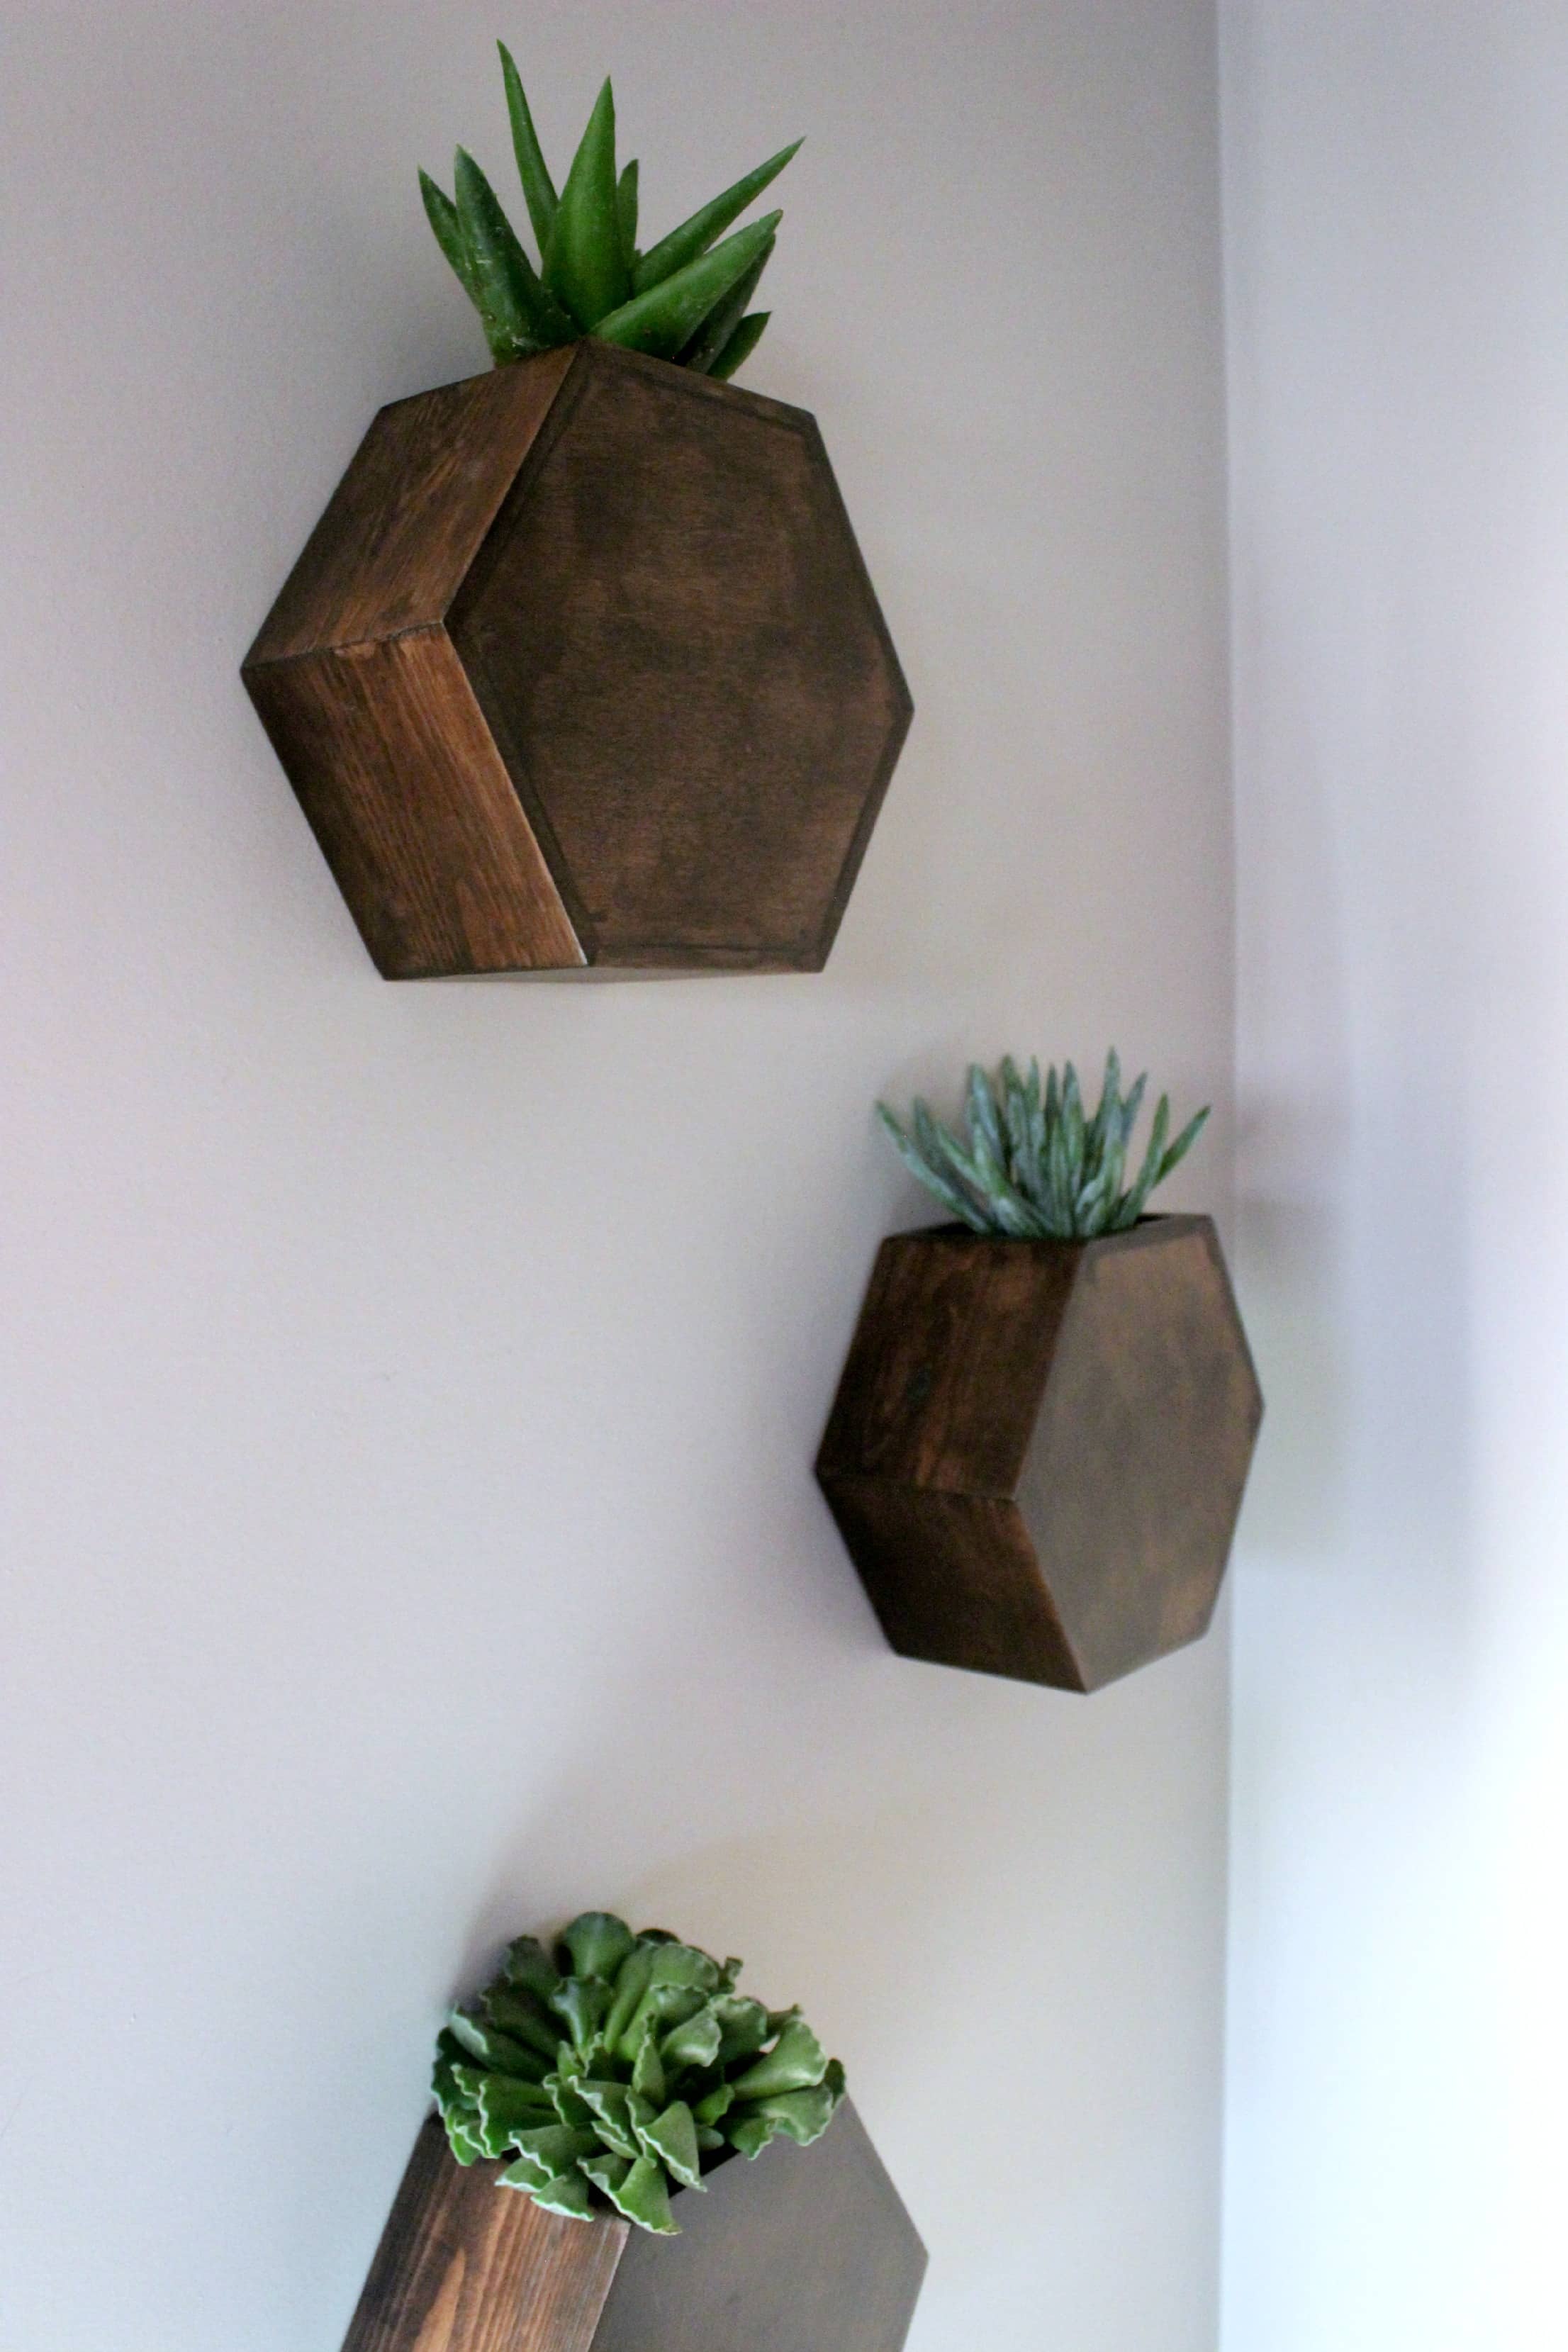 my finished hexagon wall planters